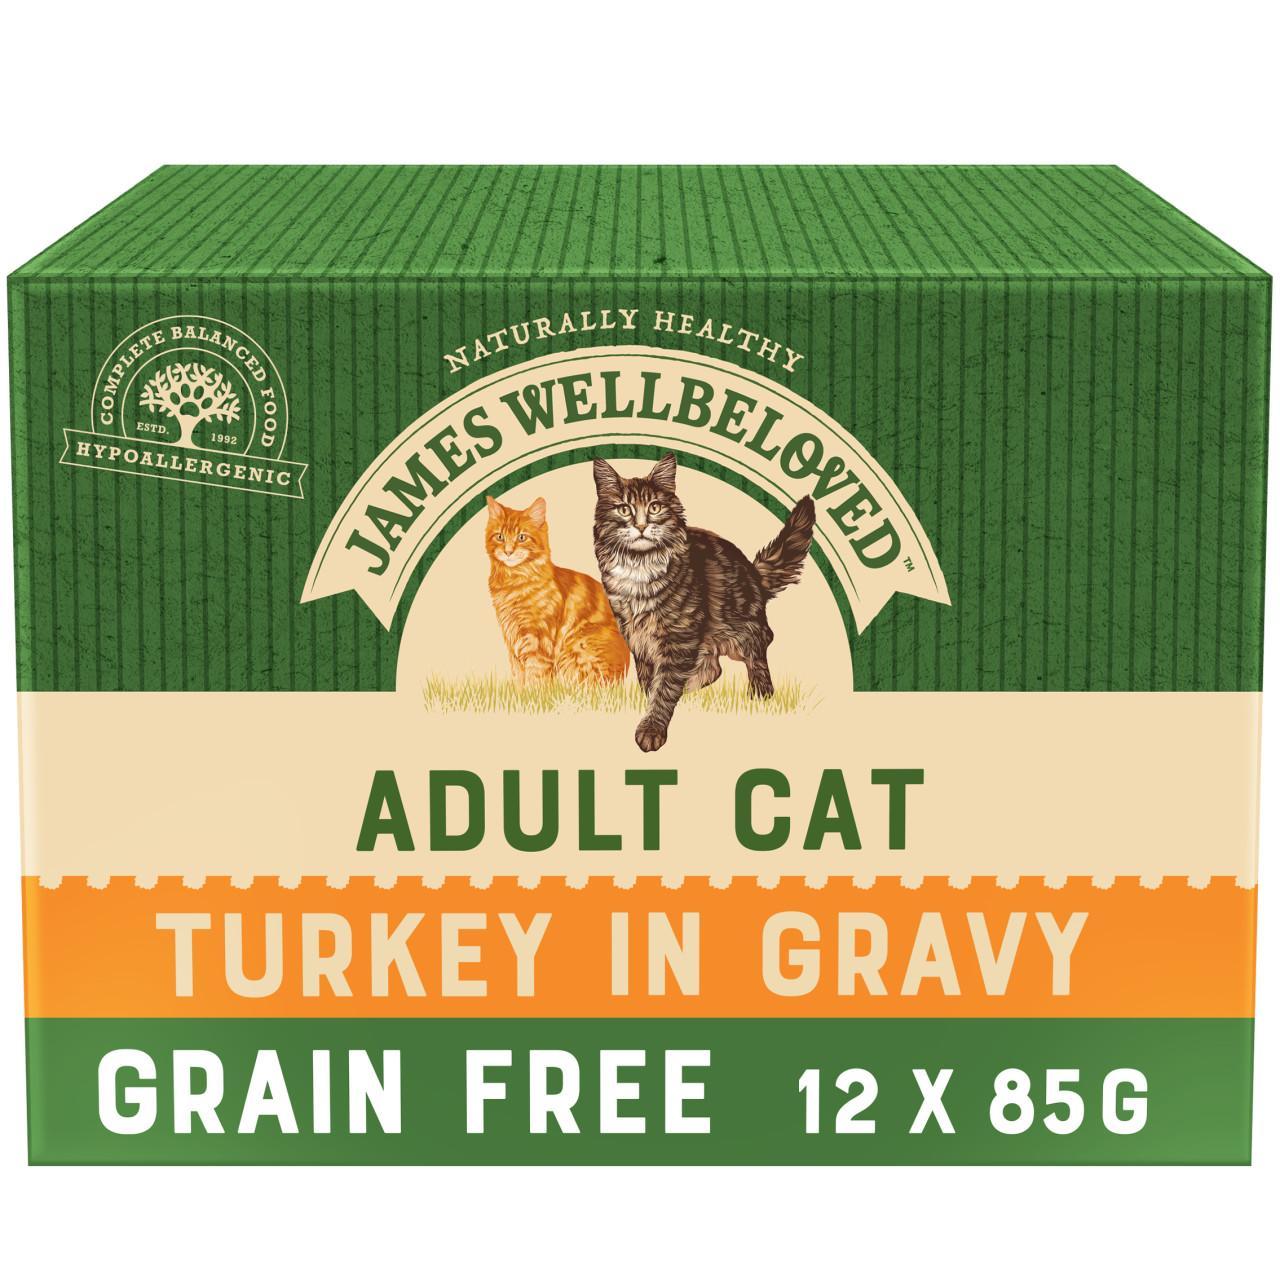 An image of James Wellbeloved Grain Free Adult Cat Turkey Pouches